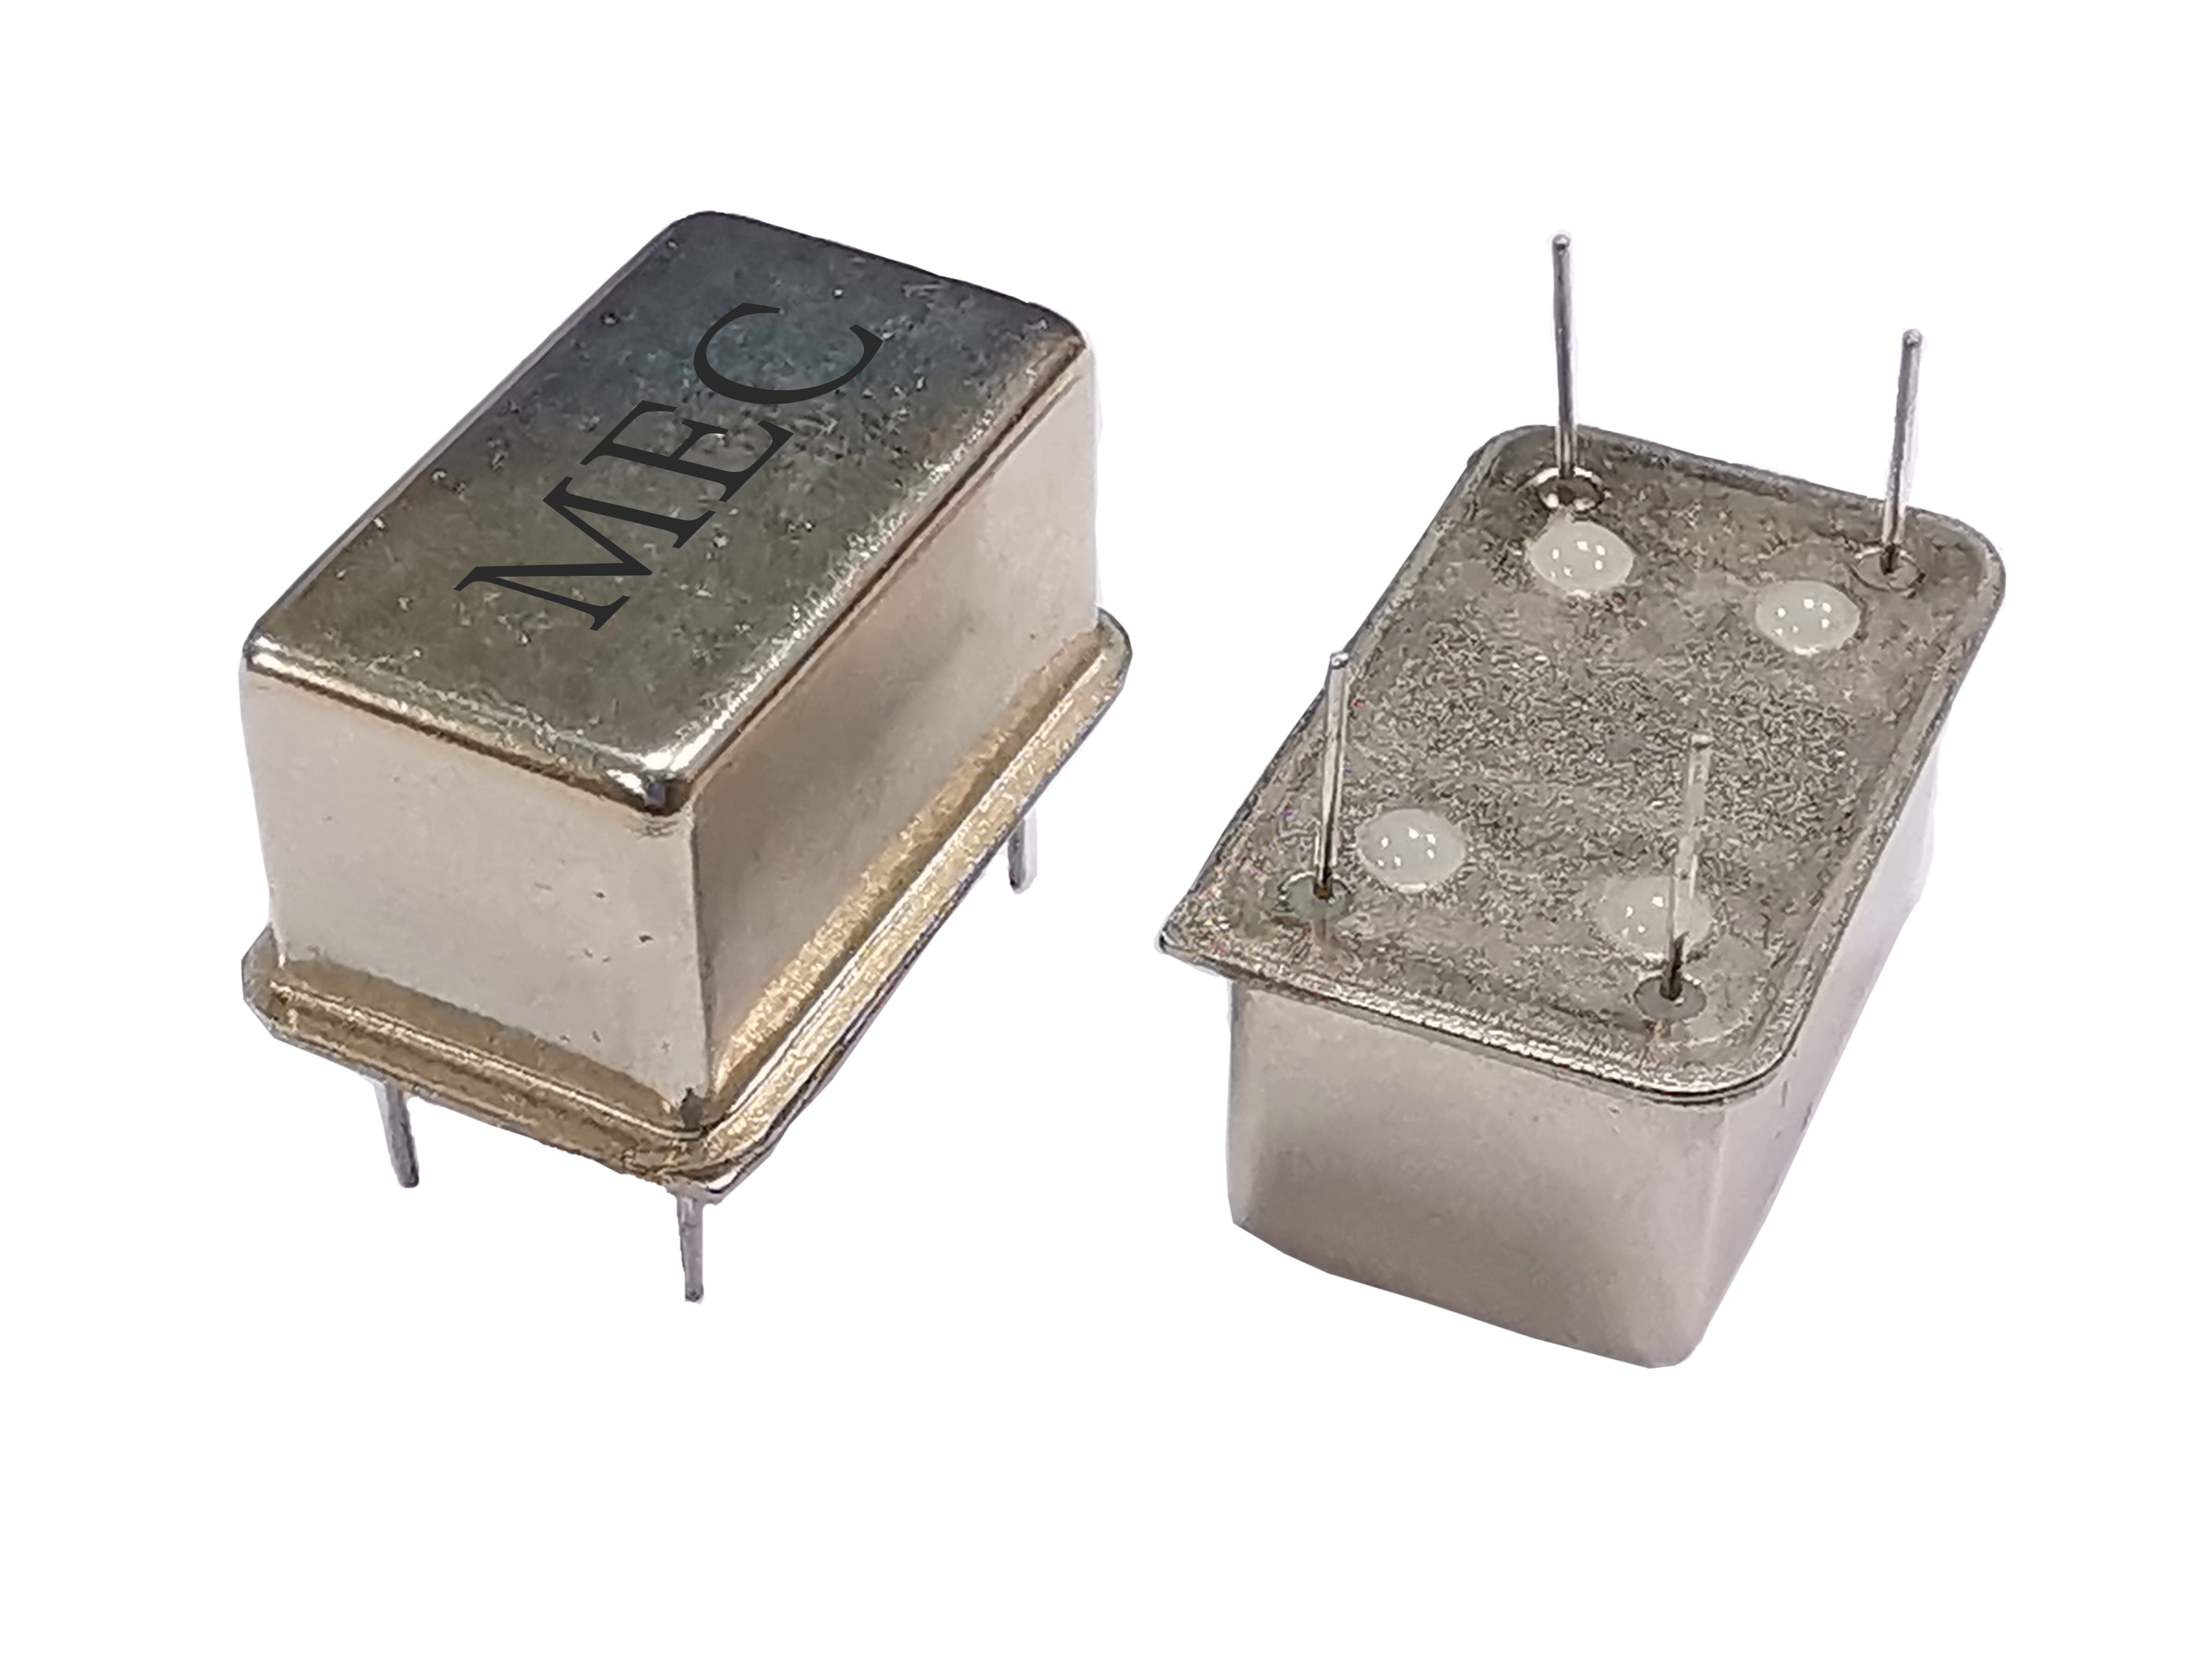 OC14 20.3x12.7mm 3.3V Square Wave Thru-Hole Type Oven Controlled Crystal Oscillator